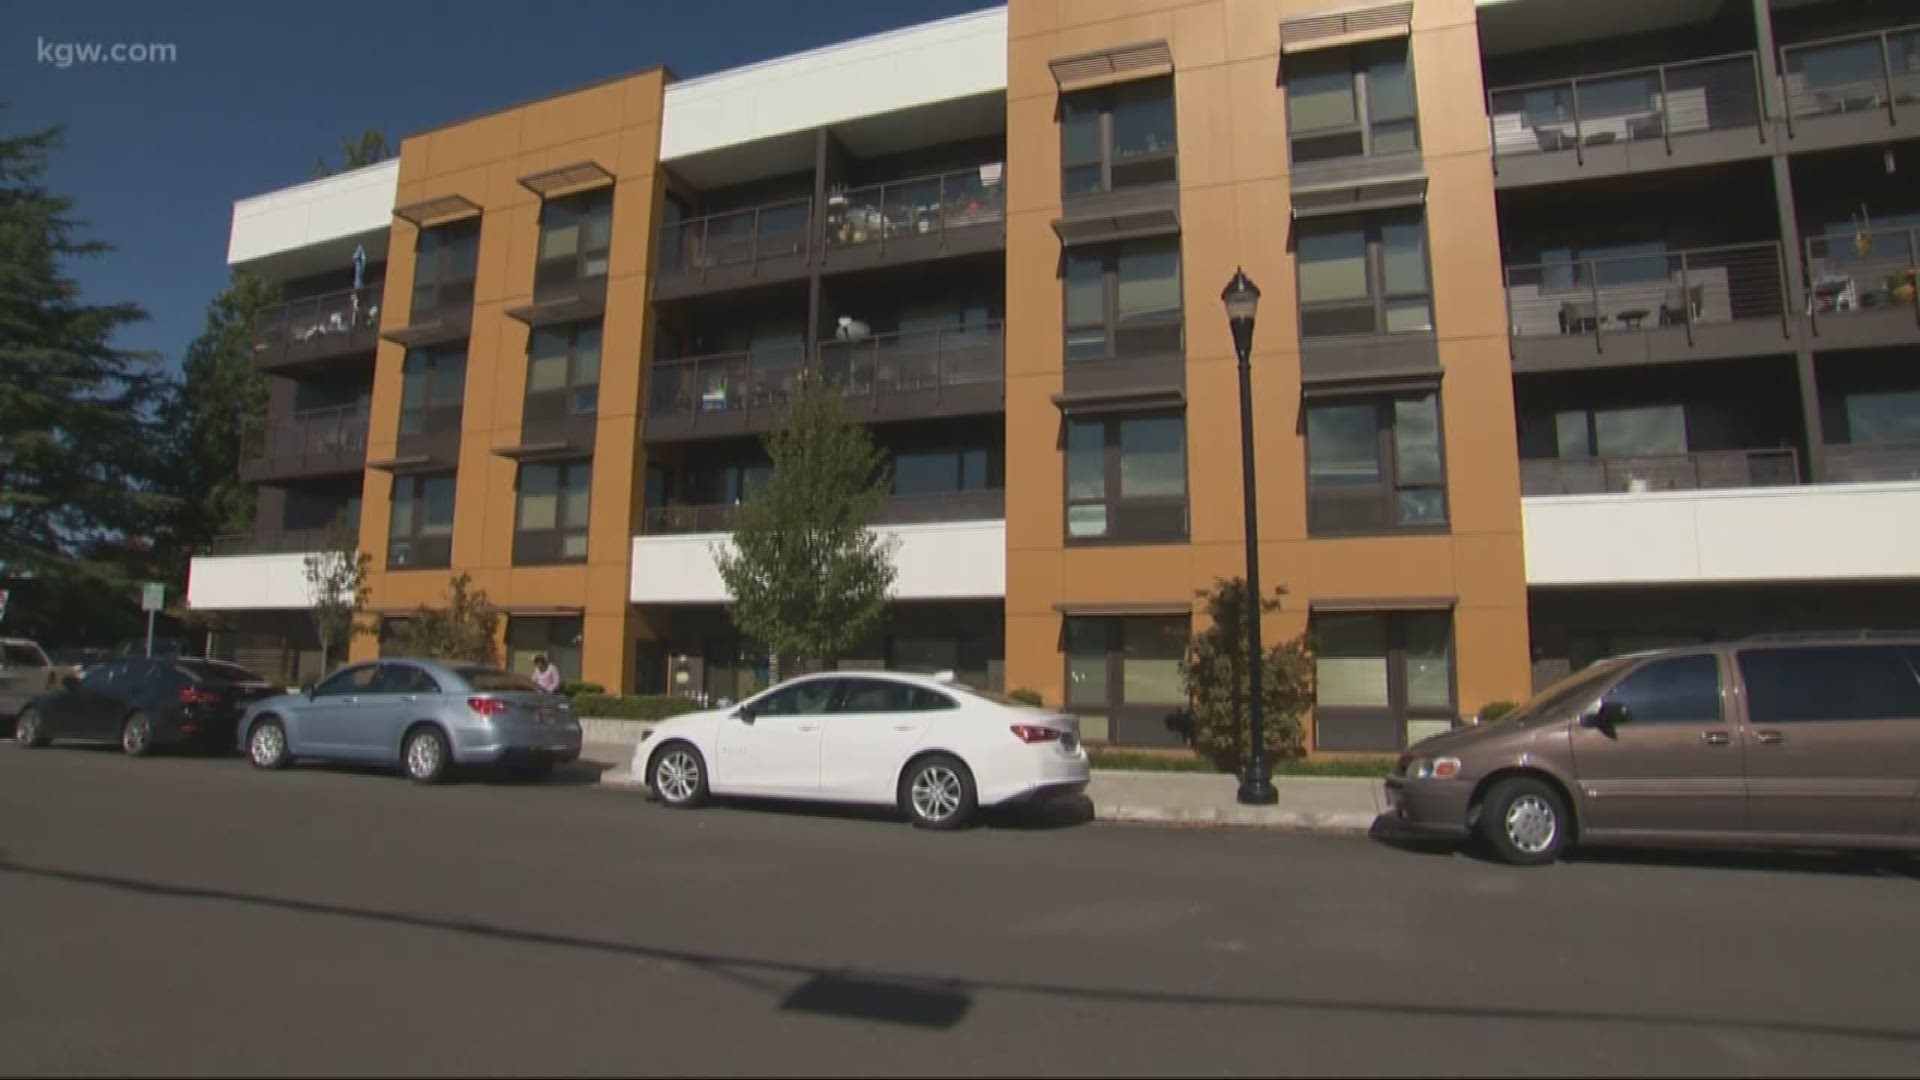 Beaverton apartment residents with disabilities are struggling to find street parking. Many new, multi-unit complexes have only a few street parking spots.